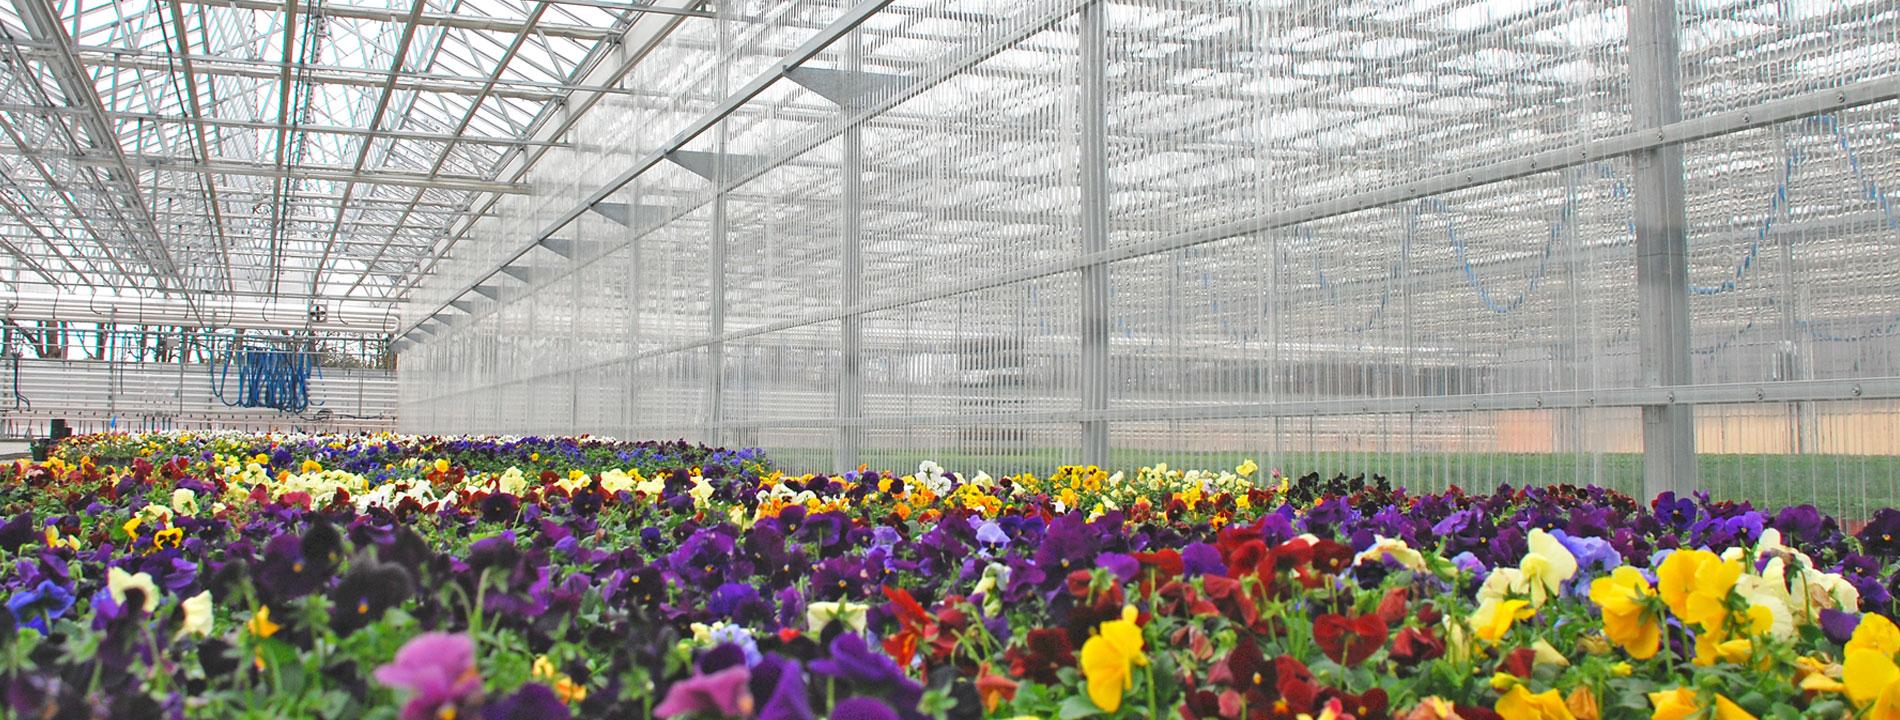 Commercial Greenhouse Coverings